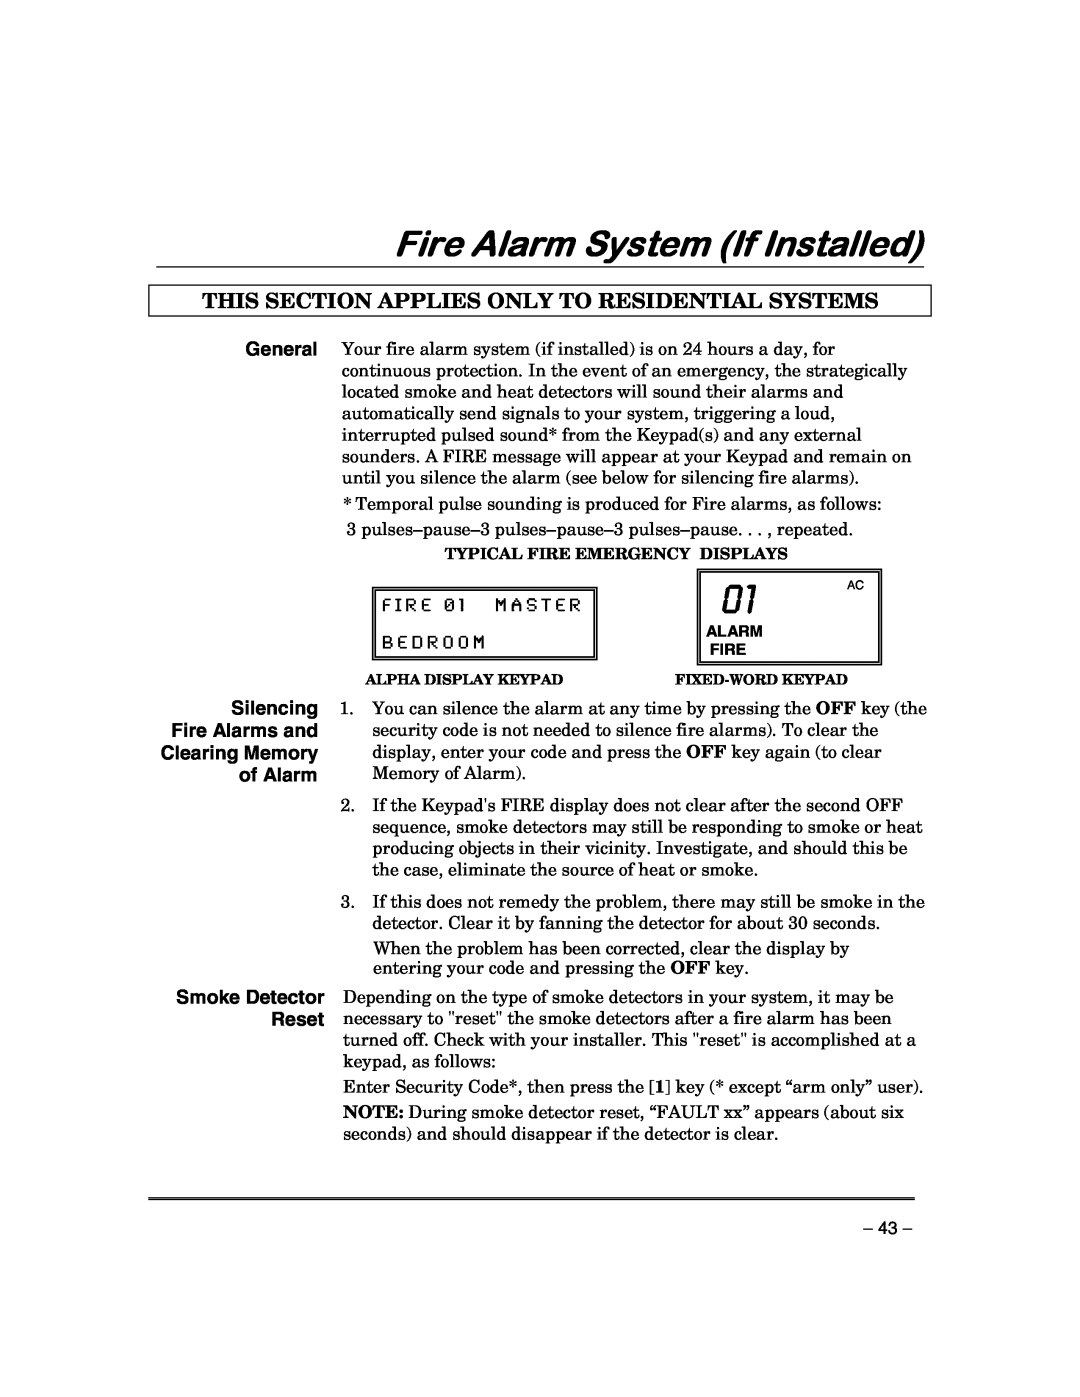 First Alert FA168CPSSIA Fire Alarm System If Installed, This Section Applies Only To Residential Systems, B E D R O O M 